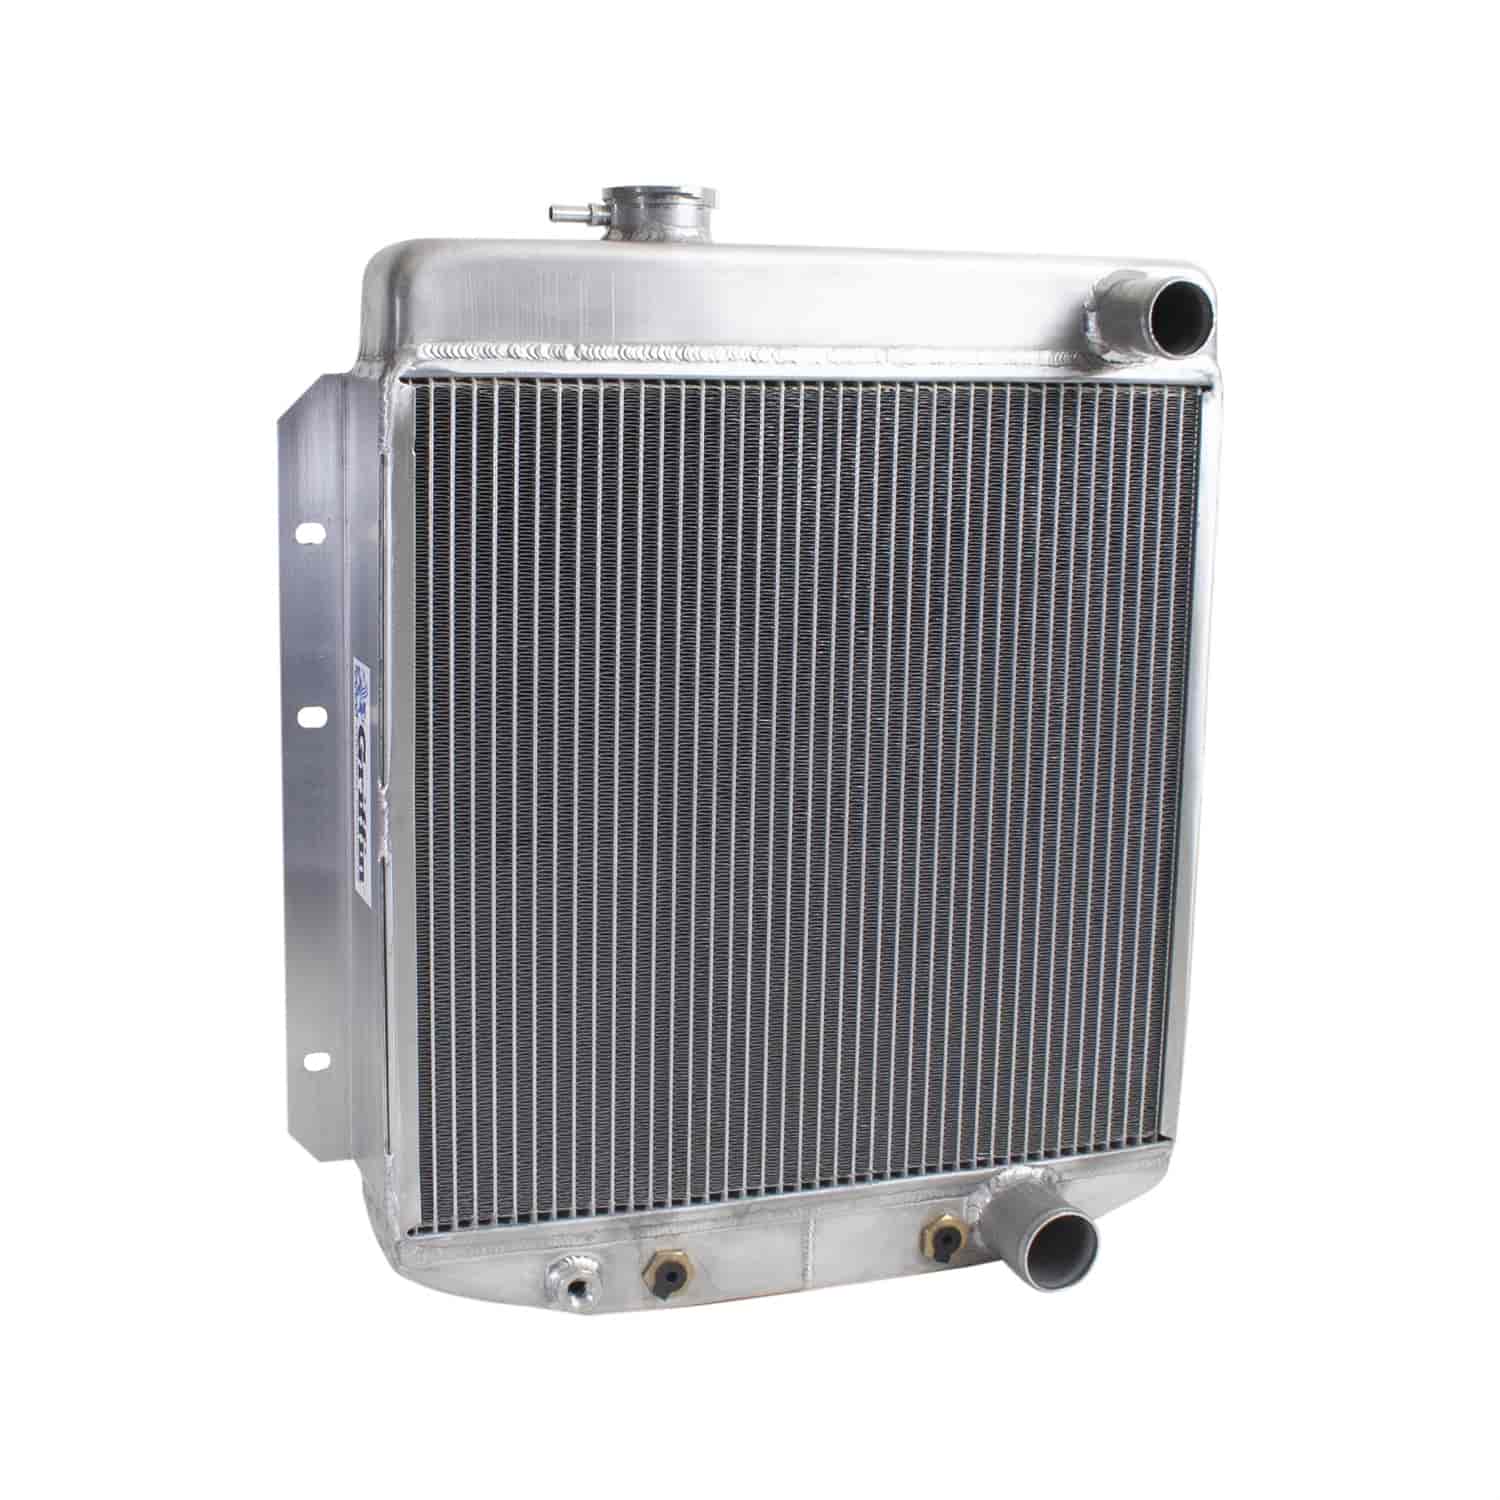 ExactFit Radiator for 1963-1965 Falcon/Comet & 1965-1966 Ford Mustang with Early Small Block